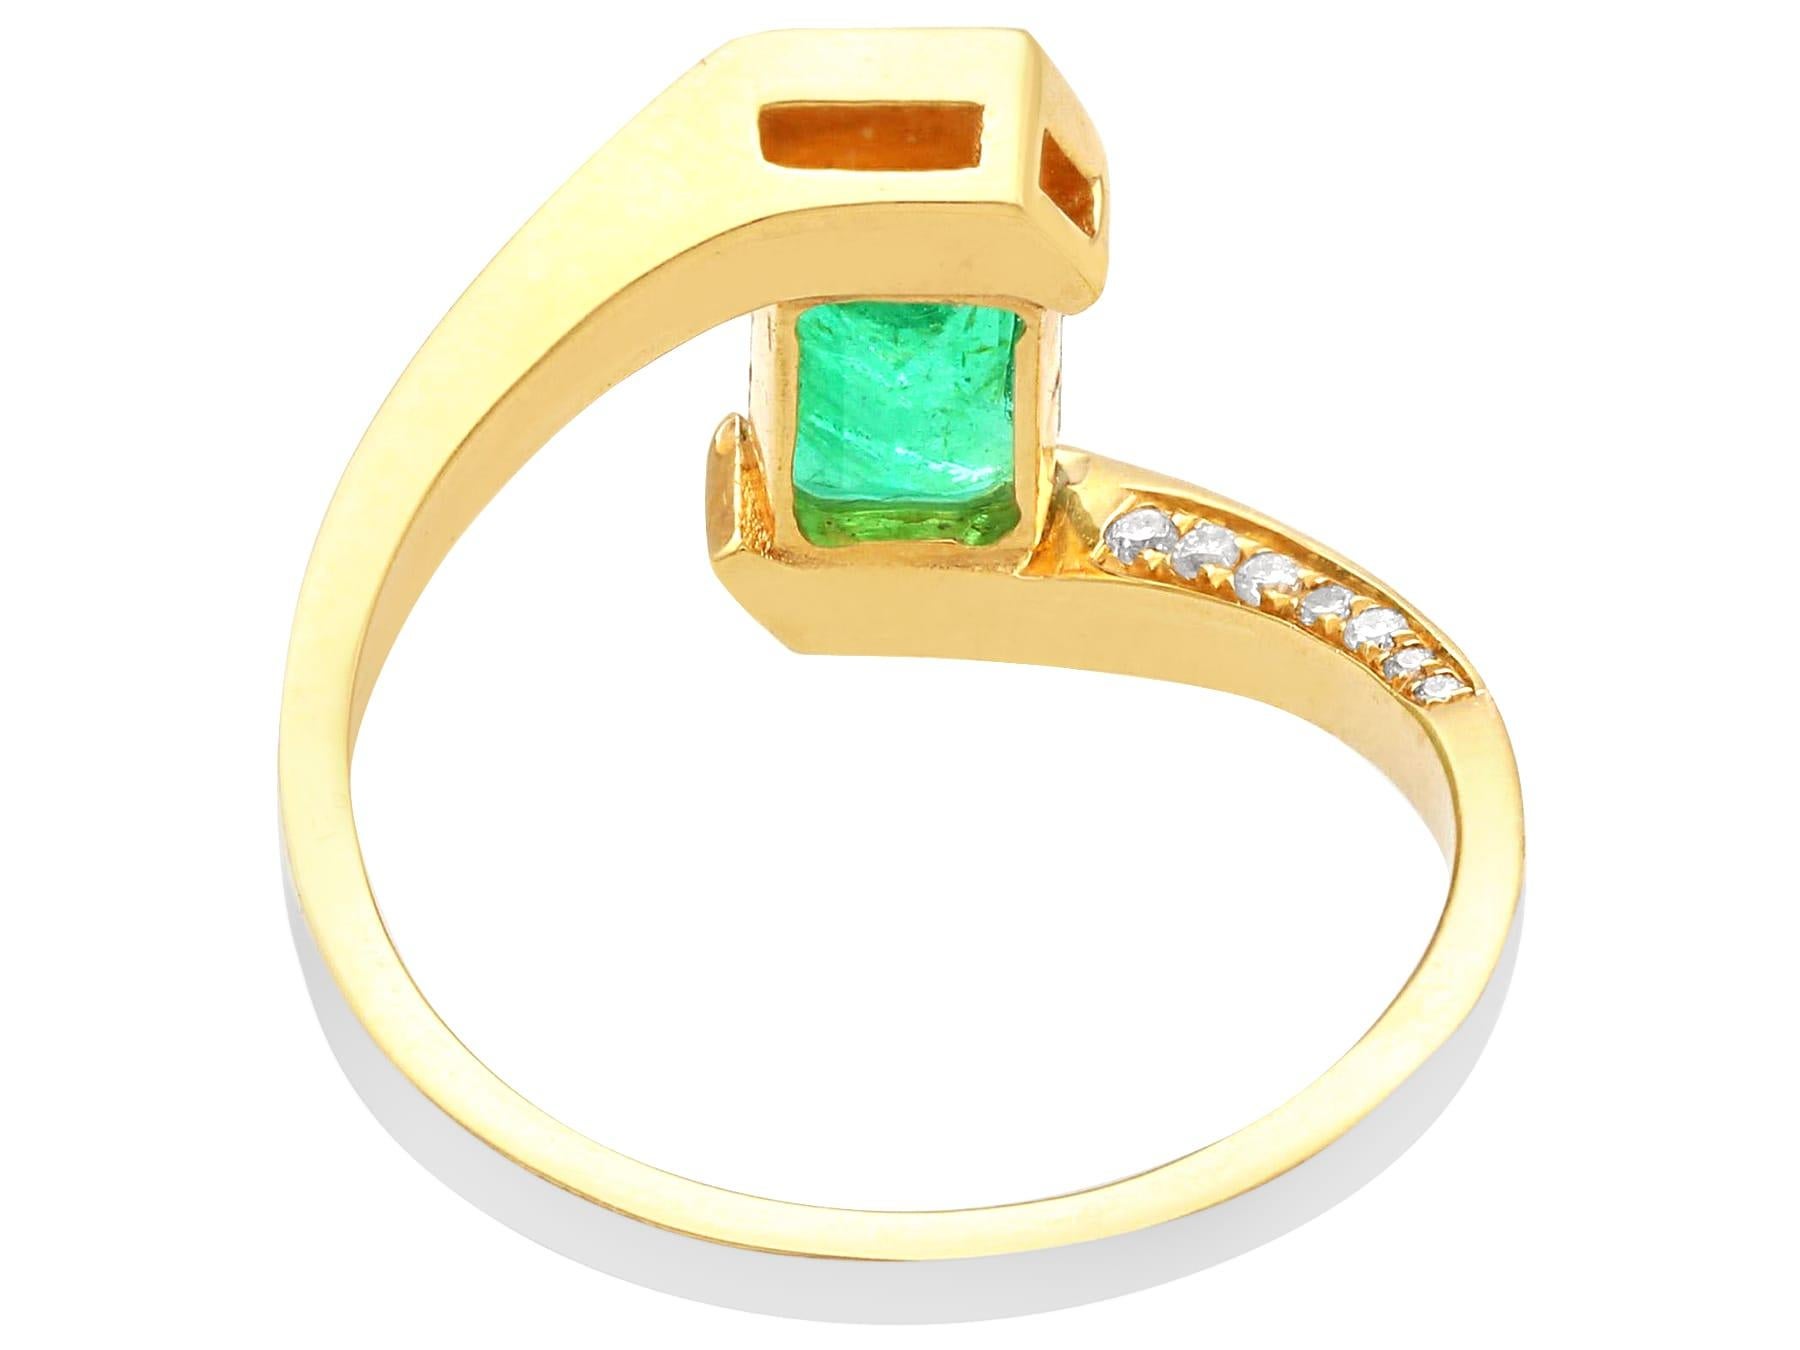 Vintage Emerald Diamond and Enamel Yellow Gold Twist Ring In Excellent Condition For Sale In Jesmond, Newcastle Upon Tyne